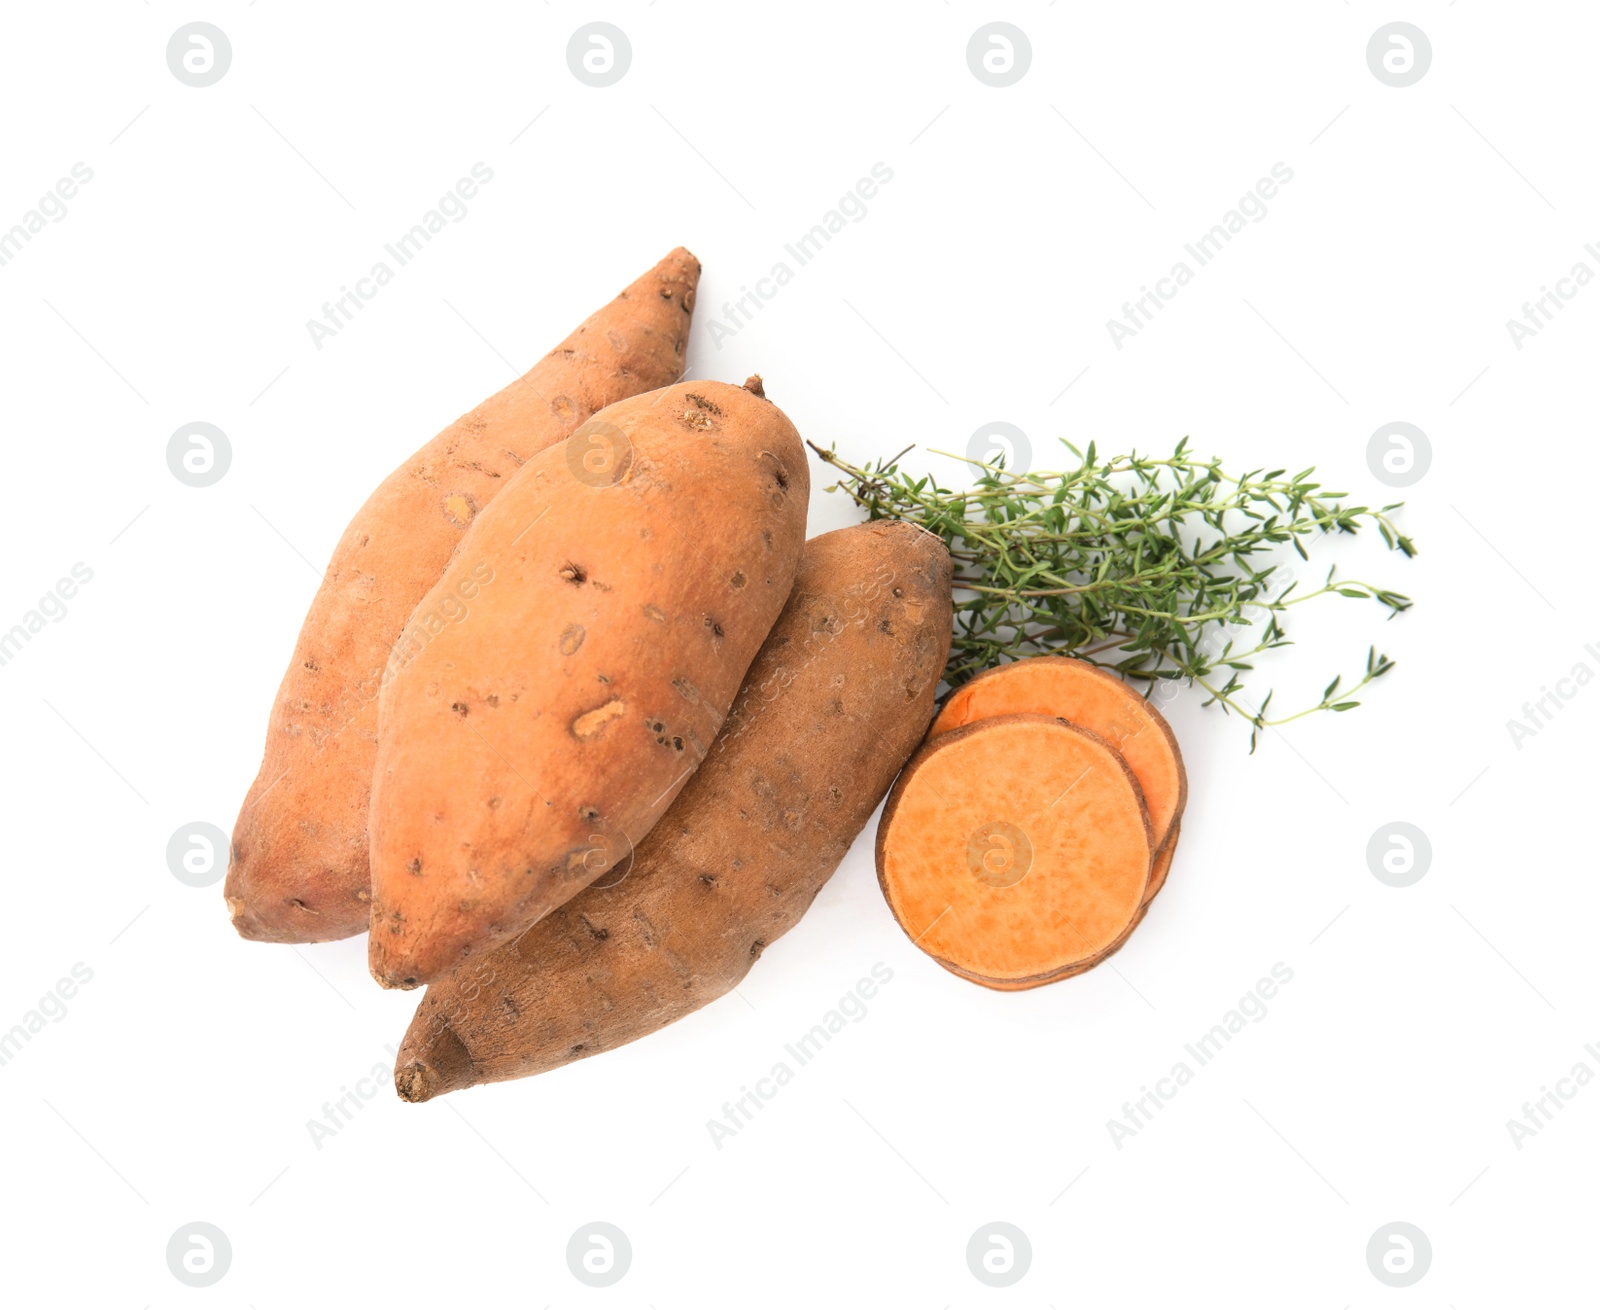 Photo of Cut and whole sweet potatoes with thyme on white background, top view